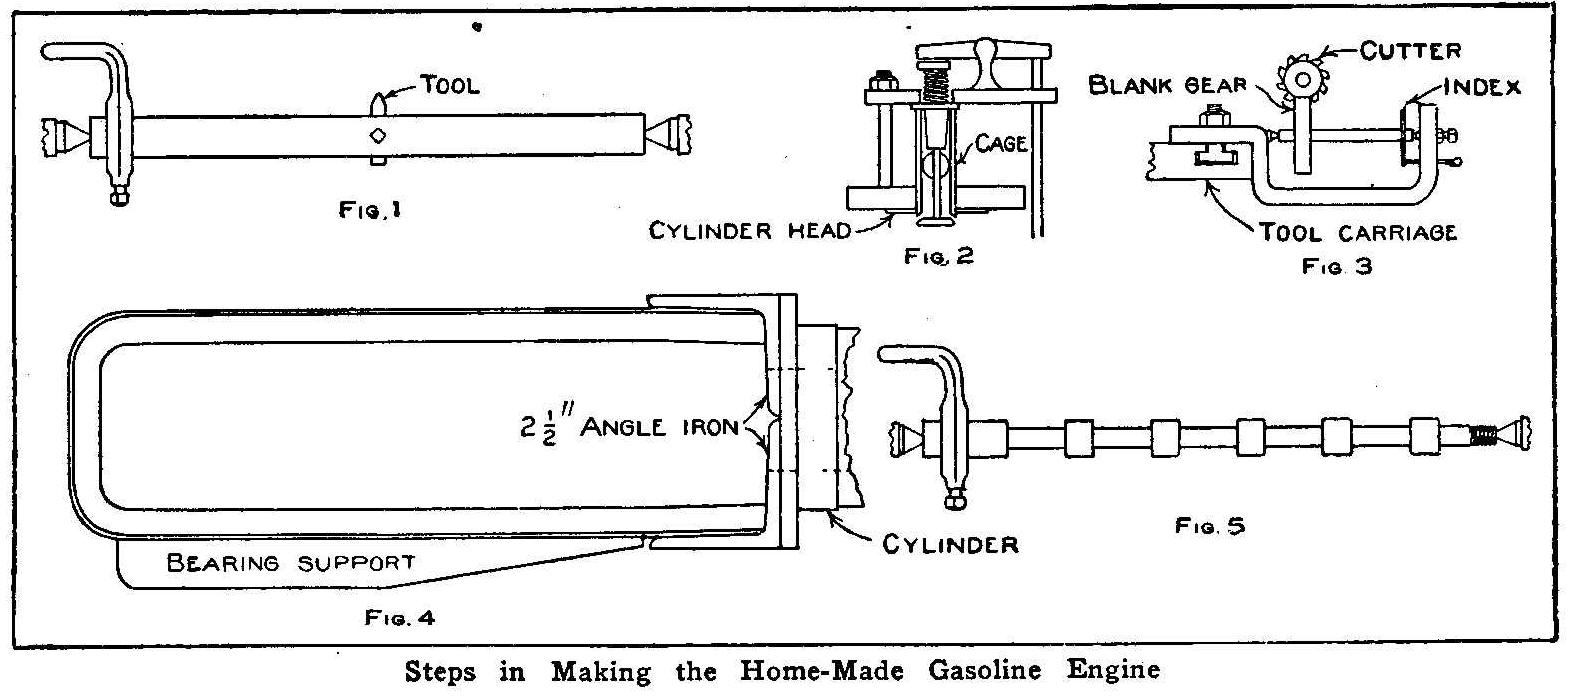 Steps in Making the Home-Made Gasoline Engine